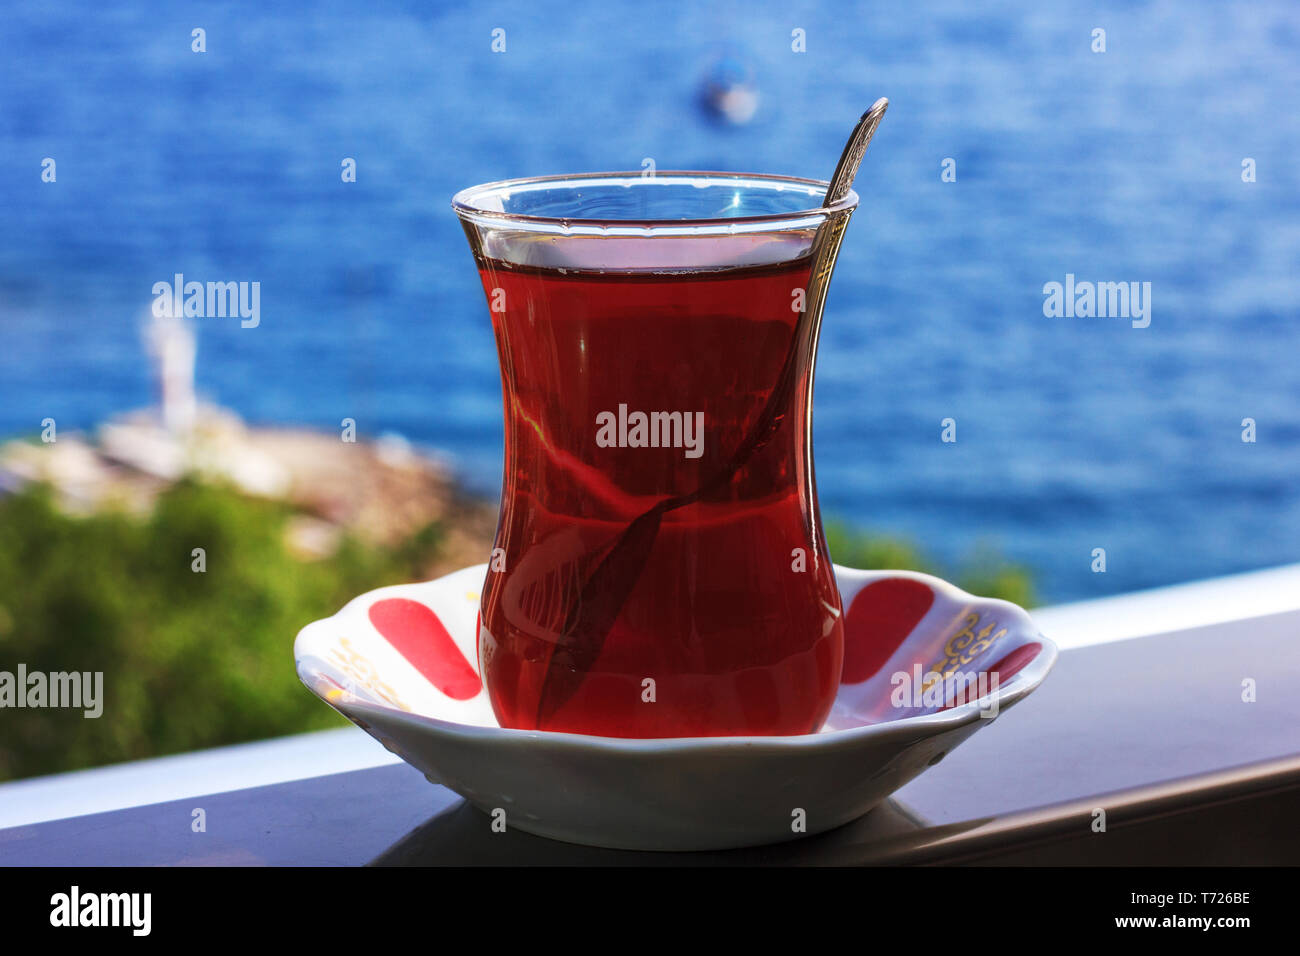 https://c8.alamy.com/comp/T726BE/turkish-black-tea-in-traditional-glass-on-background-of-the-blue-mediterranean-sea-T726BE.jpg